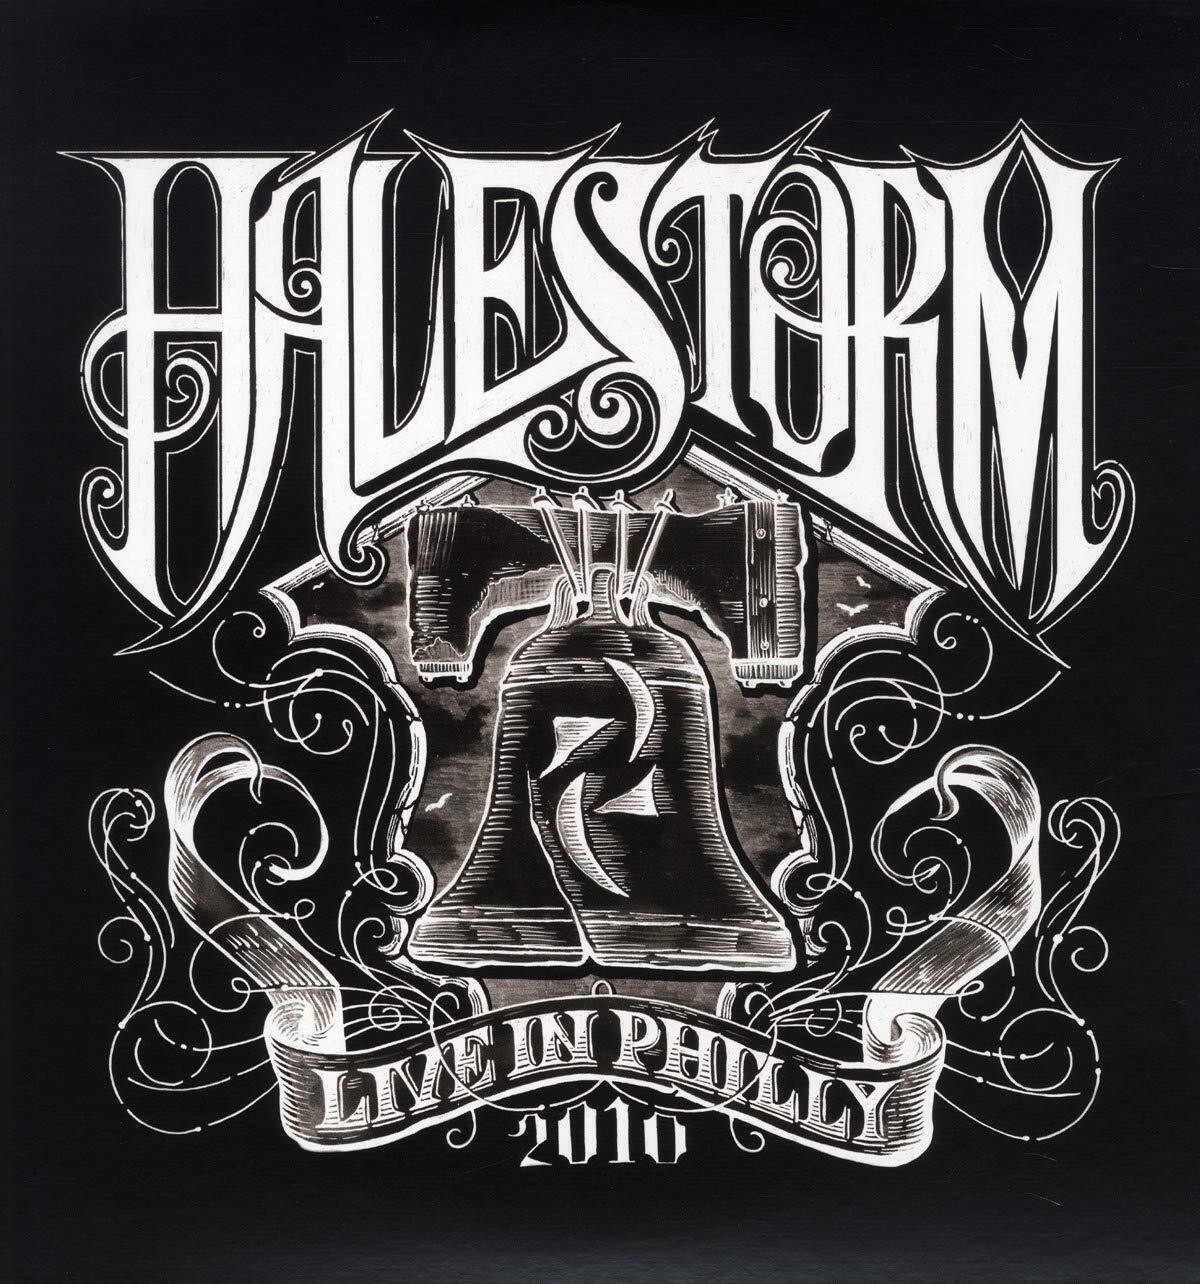 A75678647727 Halestorm - Live In Philly 2010 (Limited Edition Clear/Black Mi4